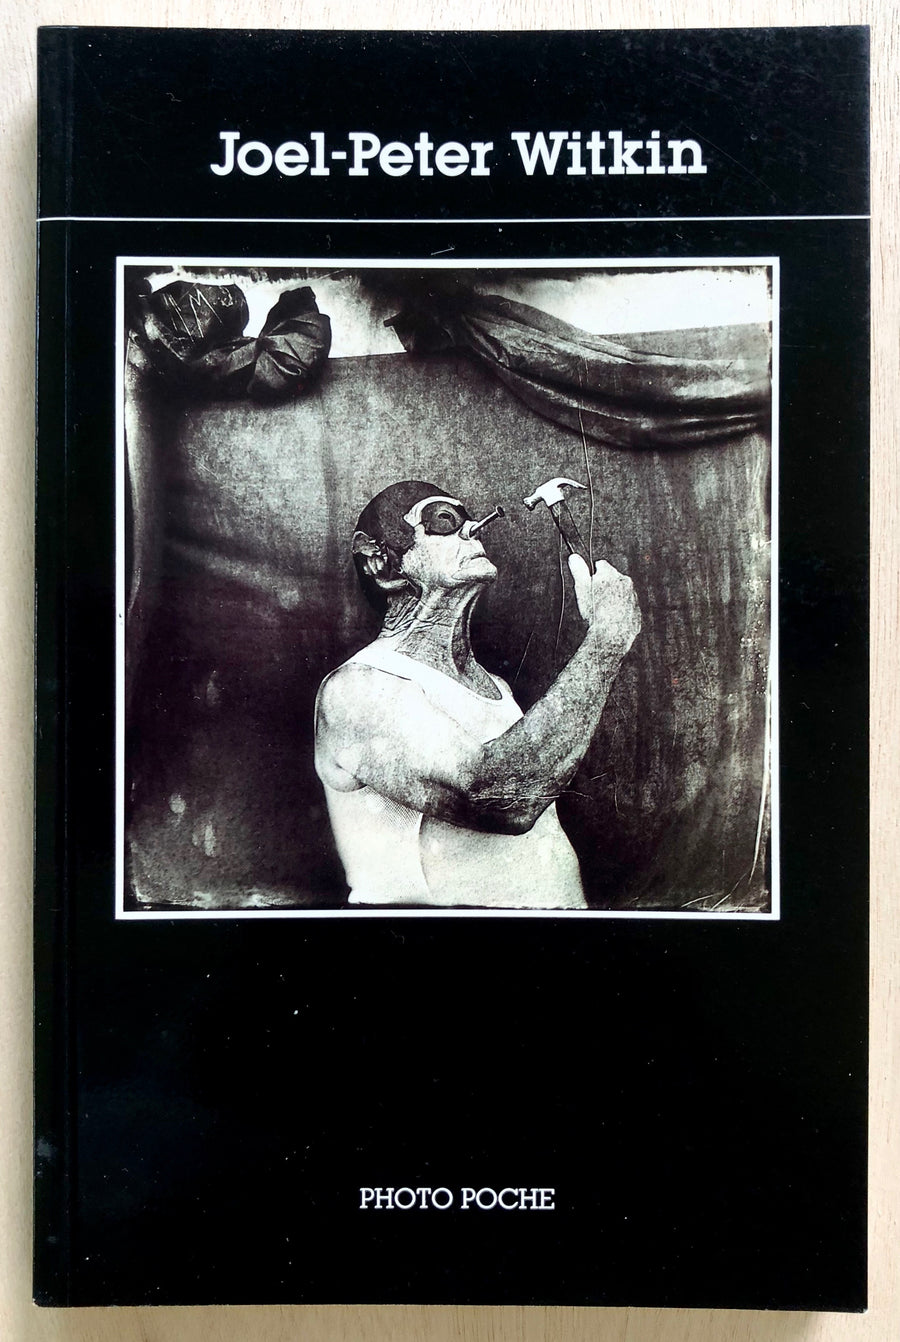 PHOTO POCHE #49: JOEL-PETER WITKIN (SIGNED)